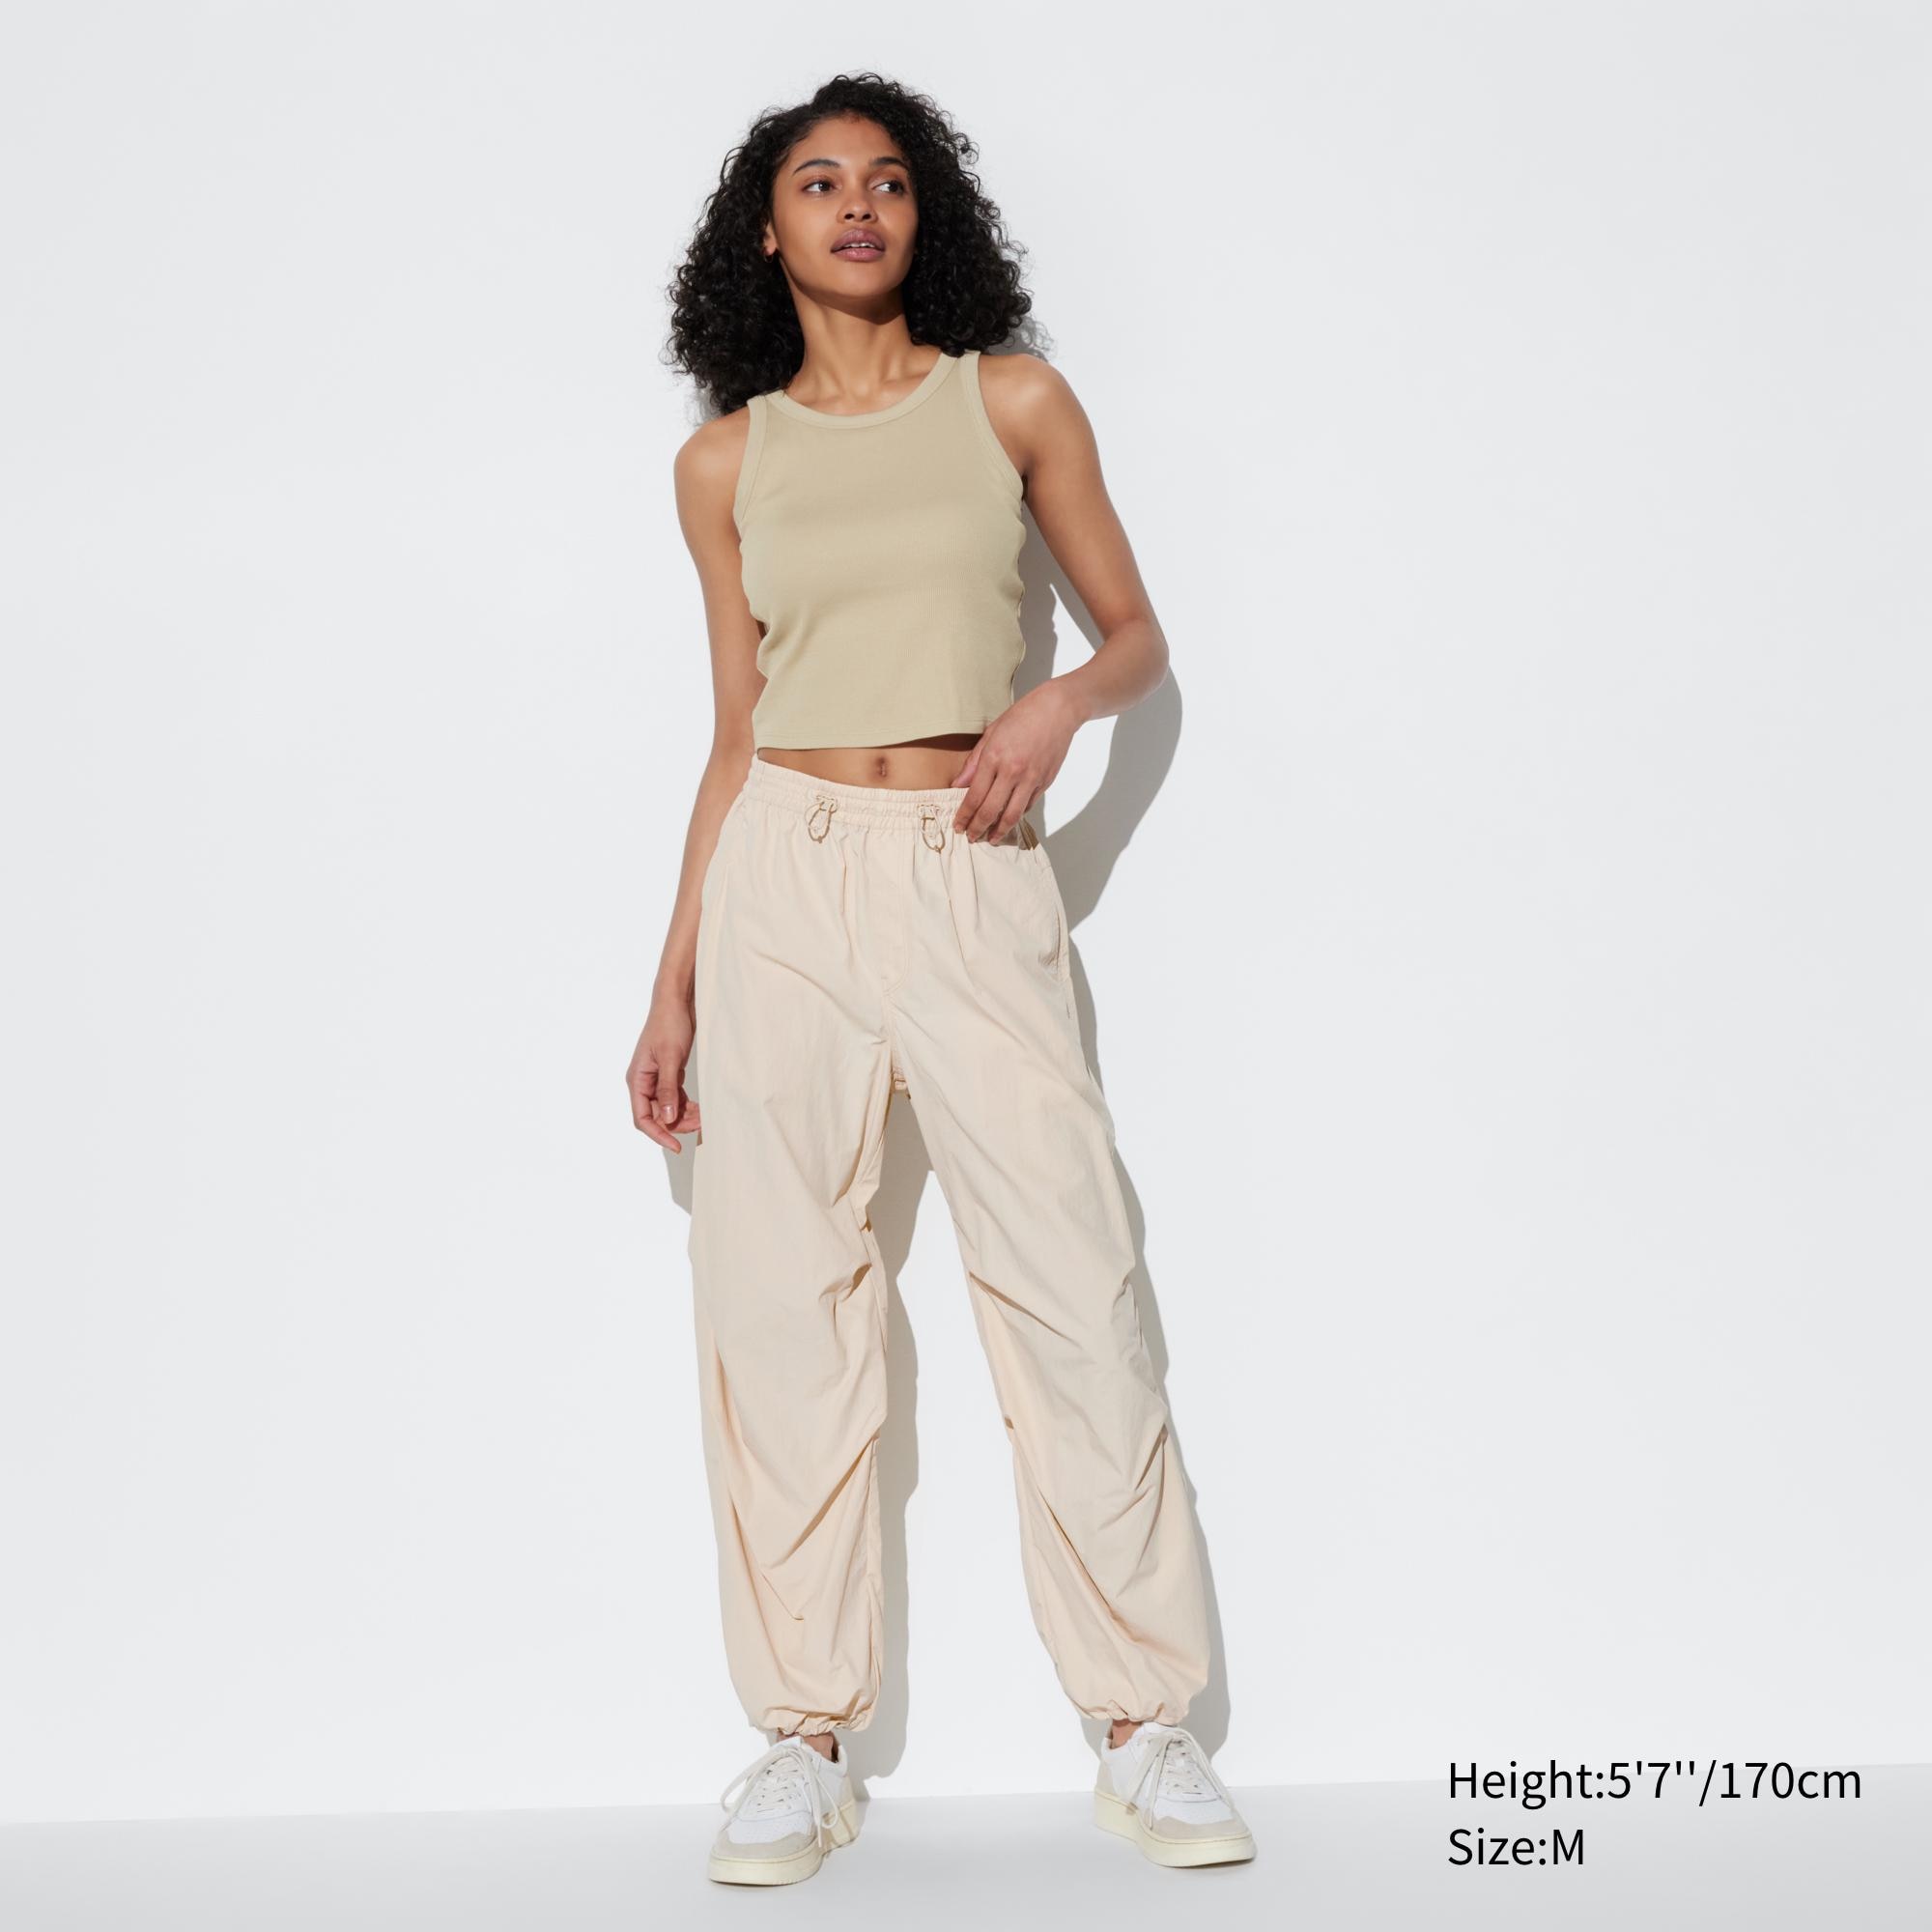 Wear these comfortable and stretch pants for any occasion. The new all-day  wear item! #UNIQLO #LifeWear #Neighborhoodlife 433785 Women... | Instagram